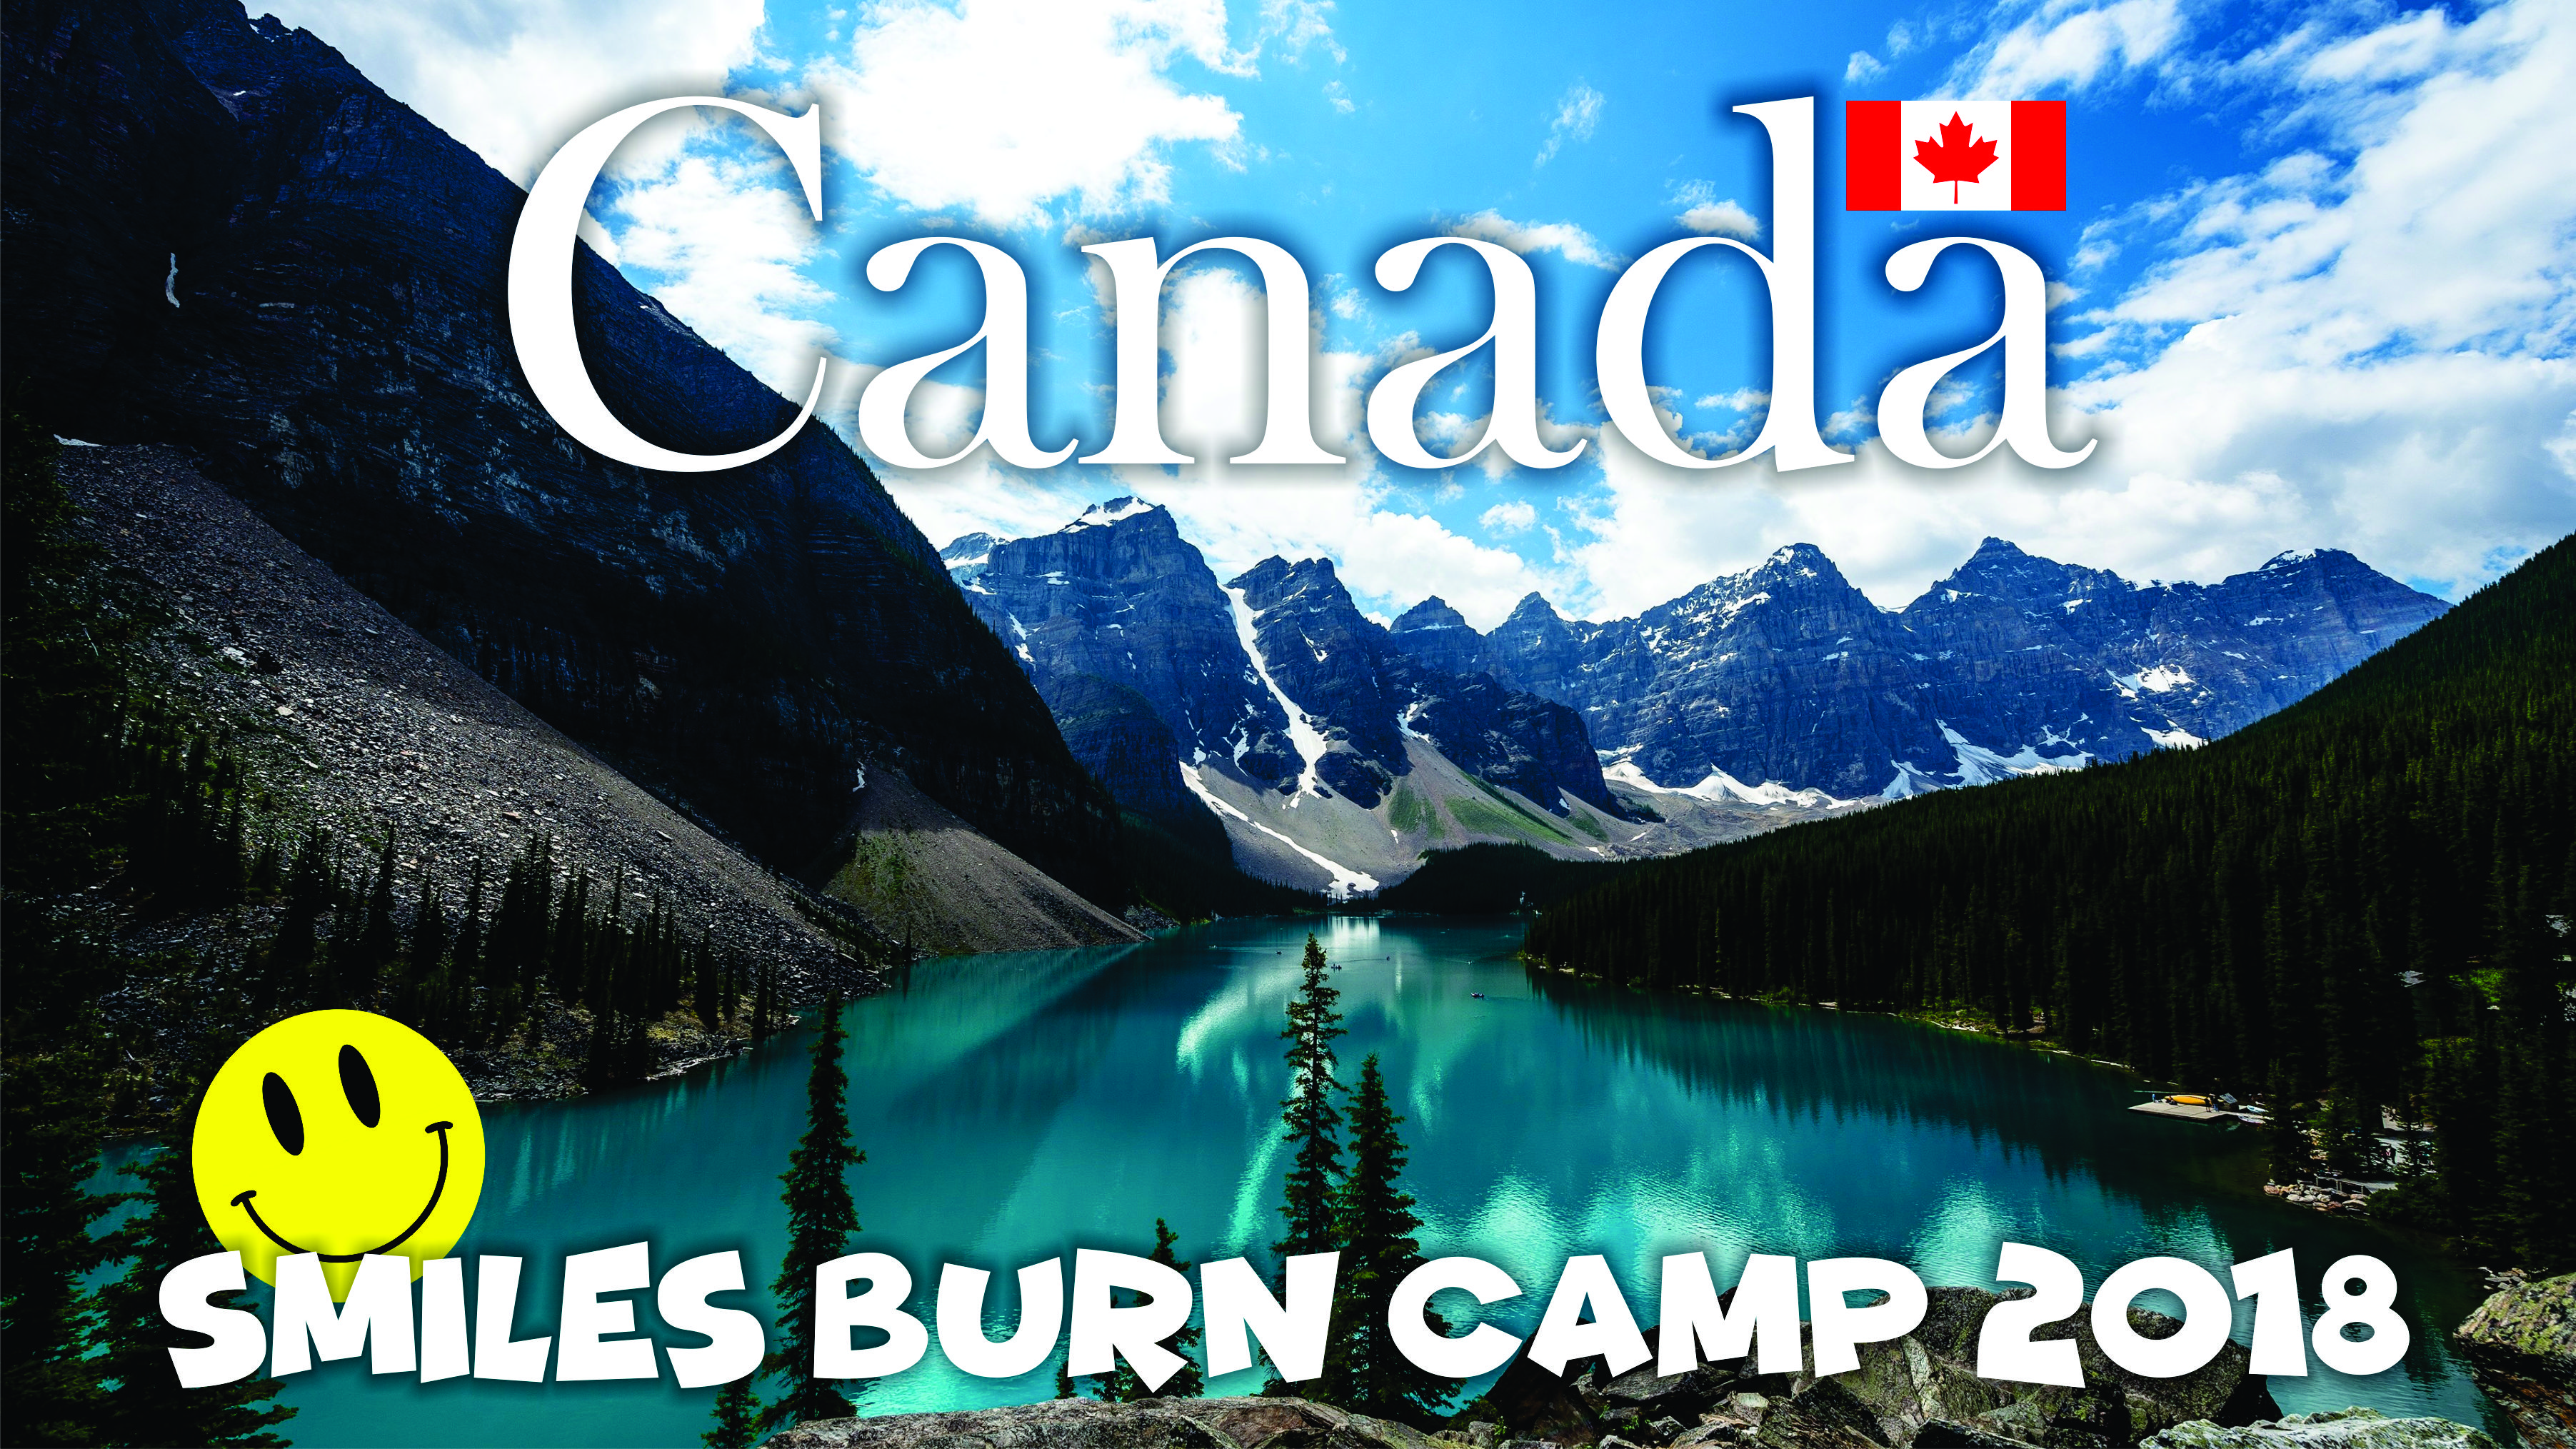 Announcing the 2018 Smiles Burn Camp… in Canada!!!